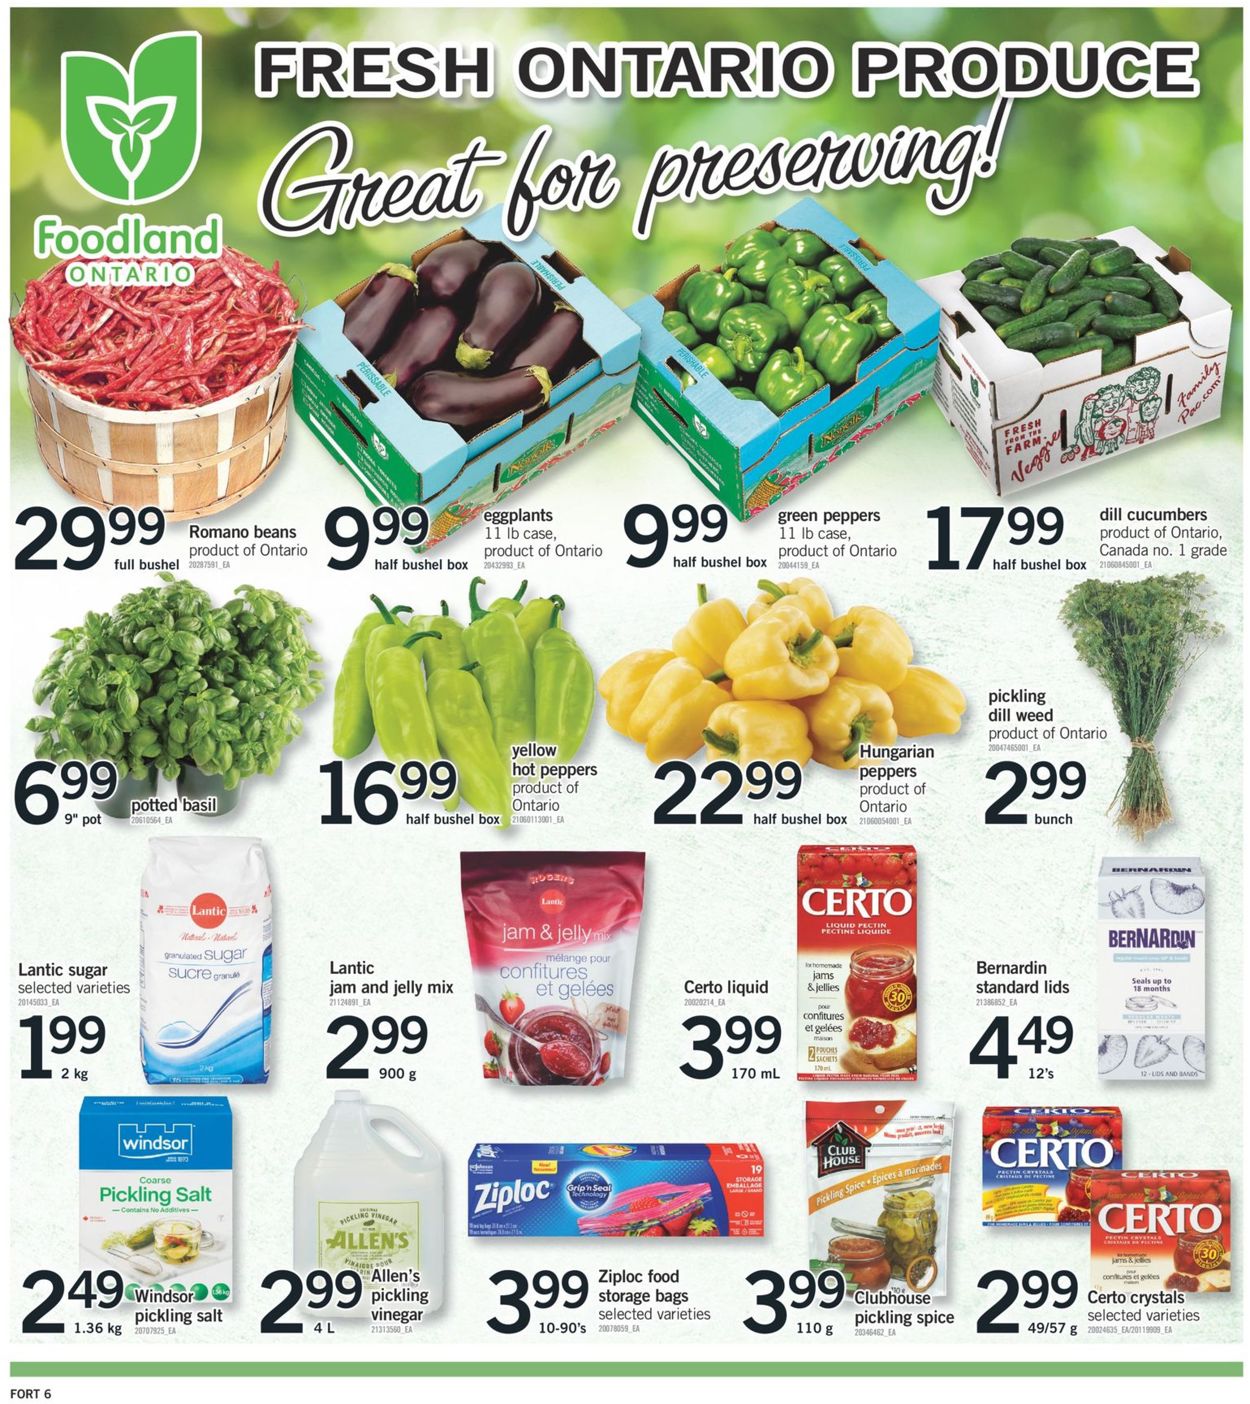 Fortinos Flyer from 08/19/2021